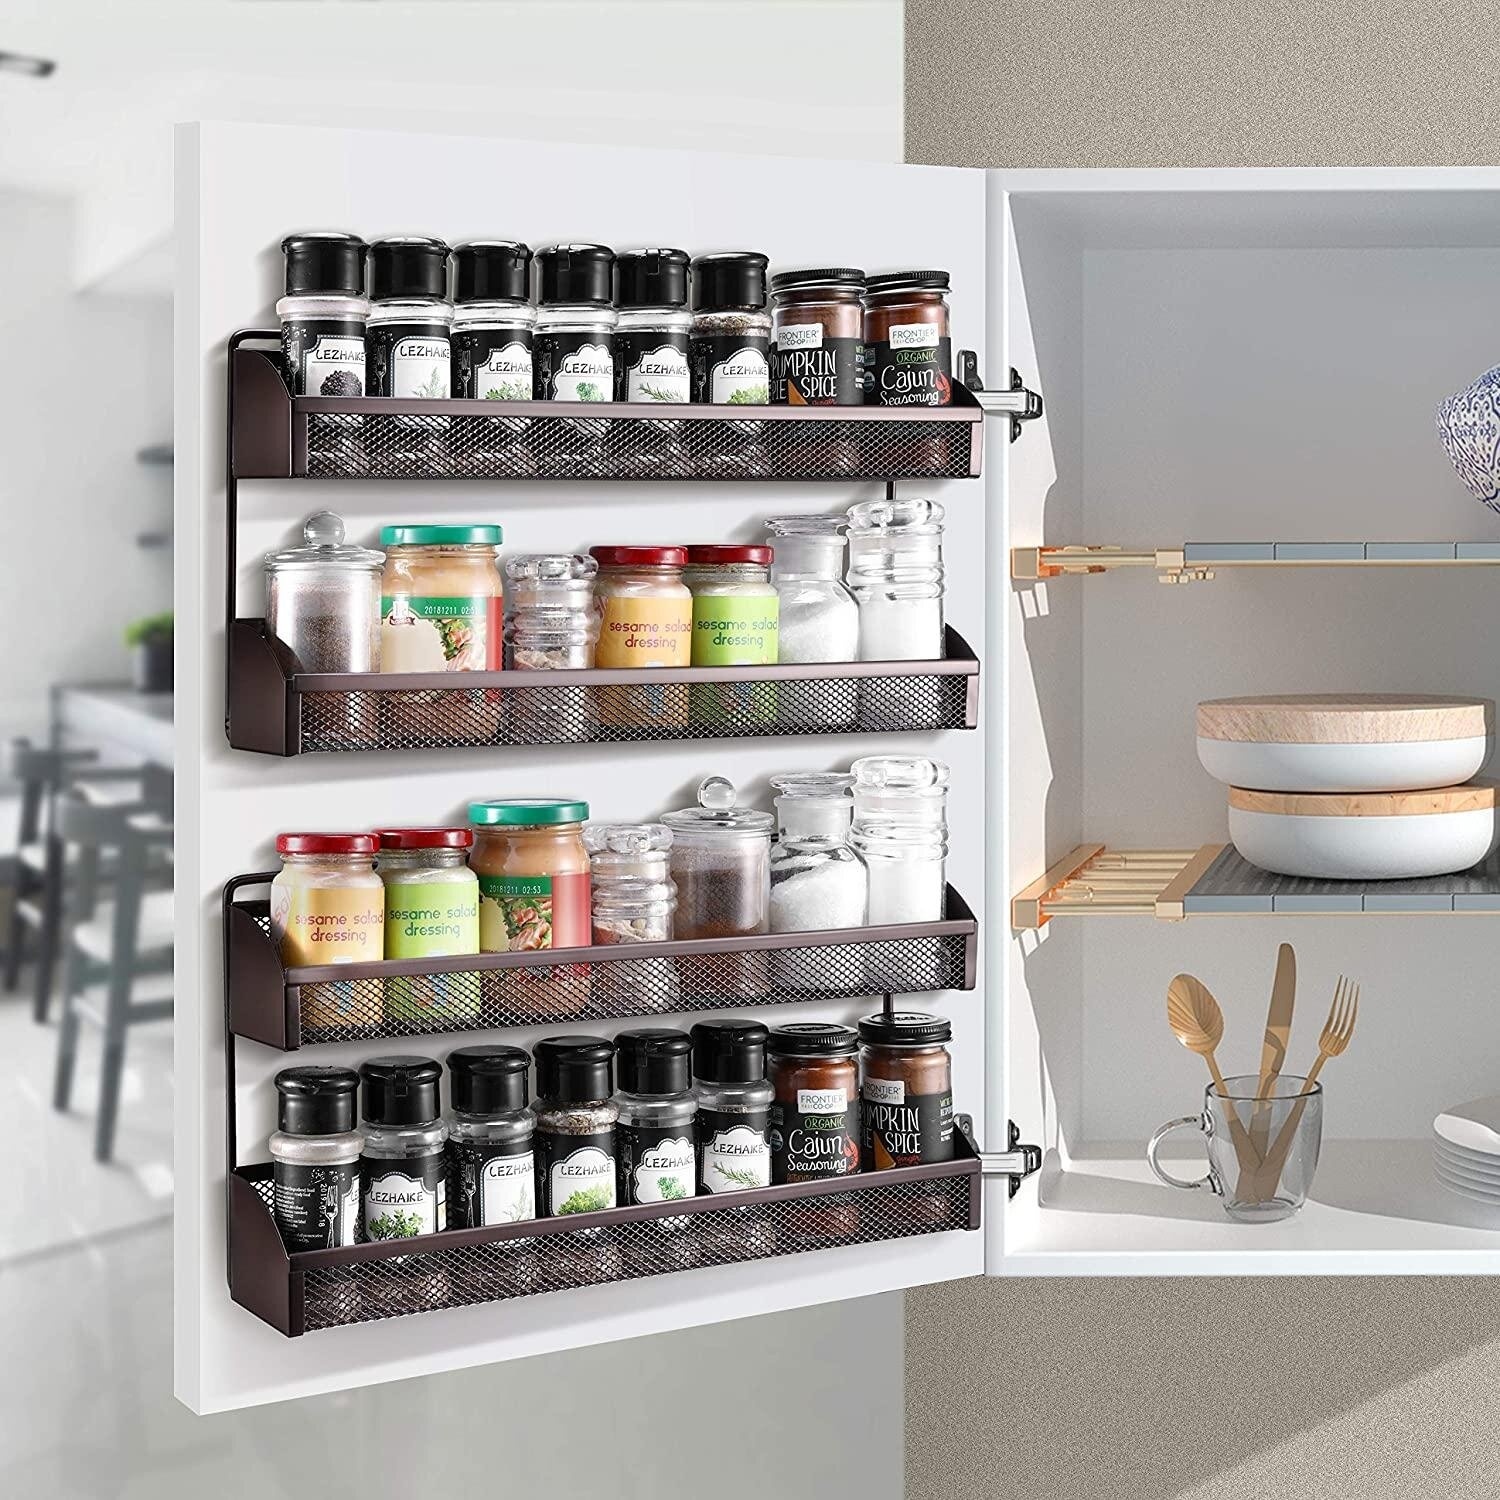 6 Tier Single Hanging Spice Rack Organizer For Cabinet- Wall